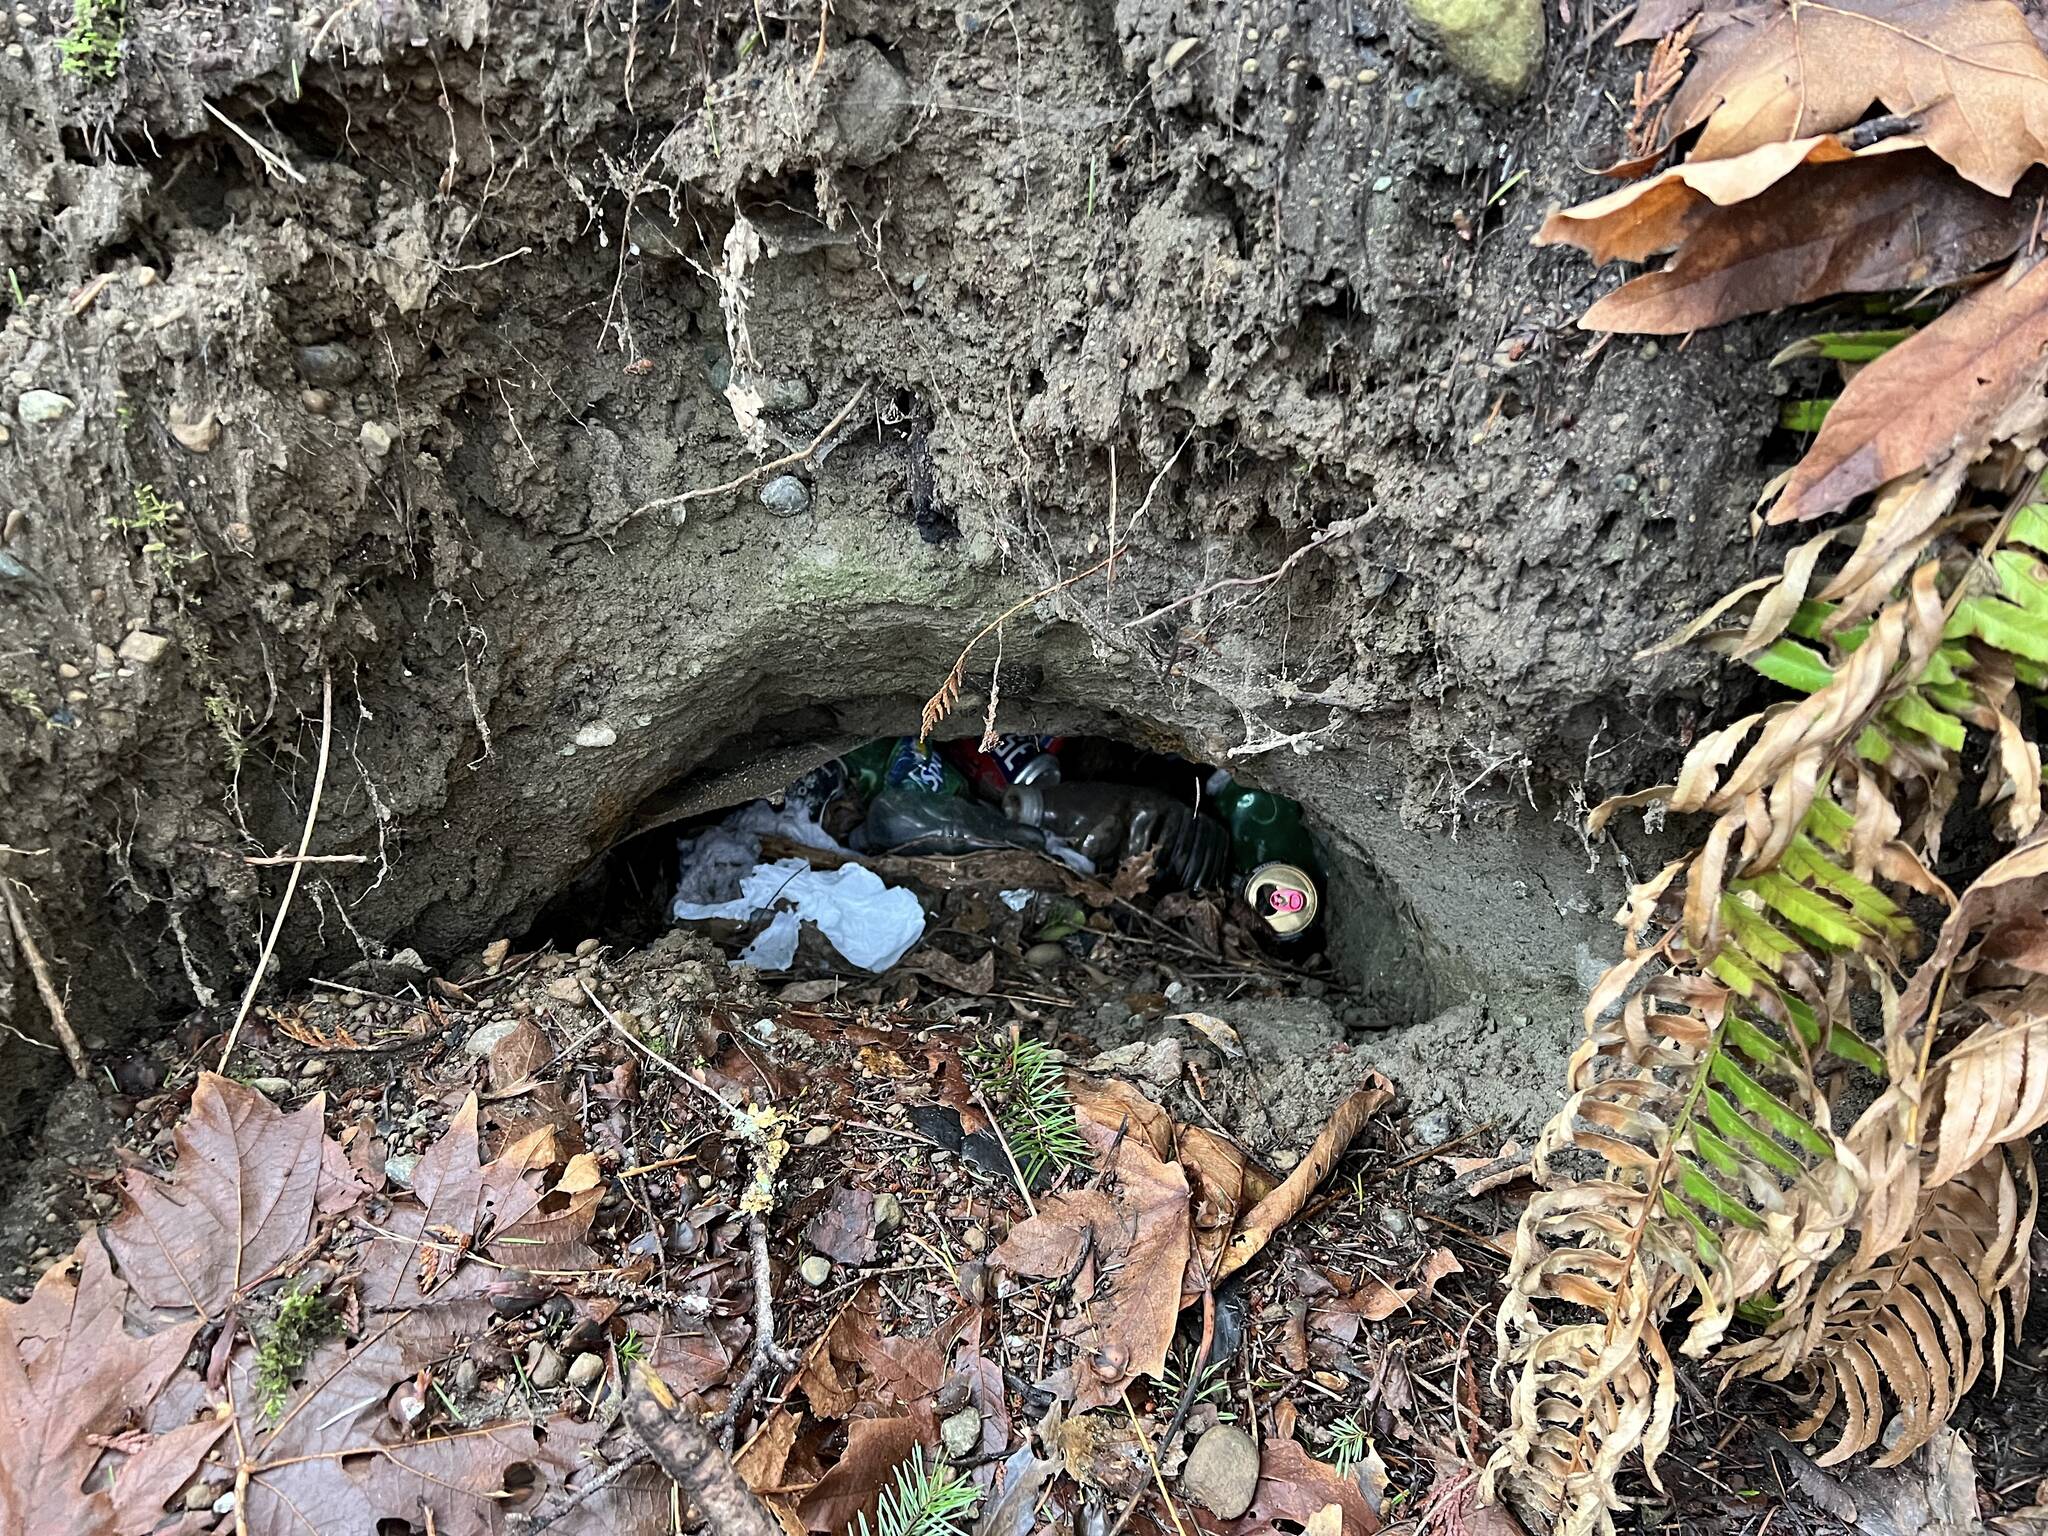 A trash pit dug into the side of a hill was discovered at one encampment in Poulsbo.